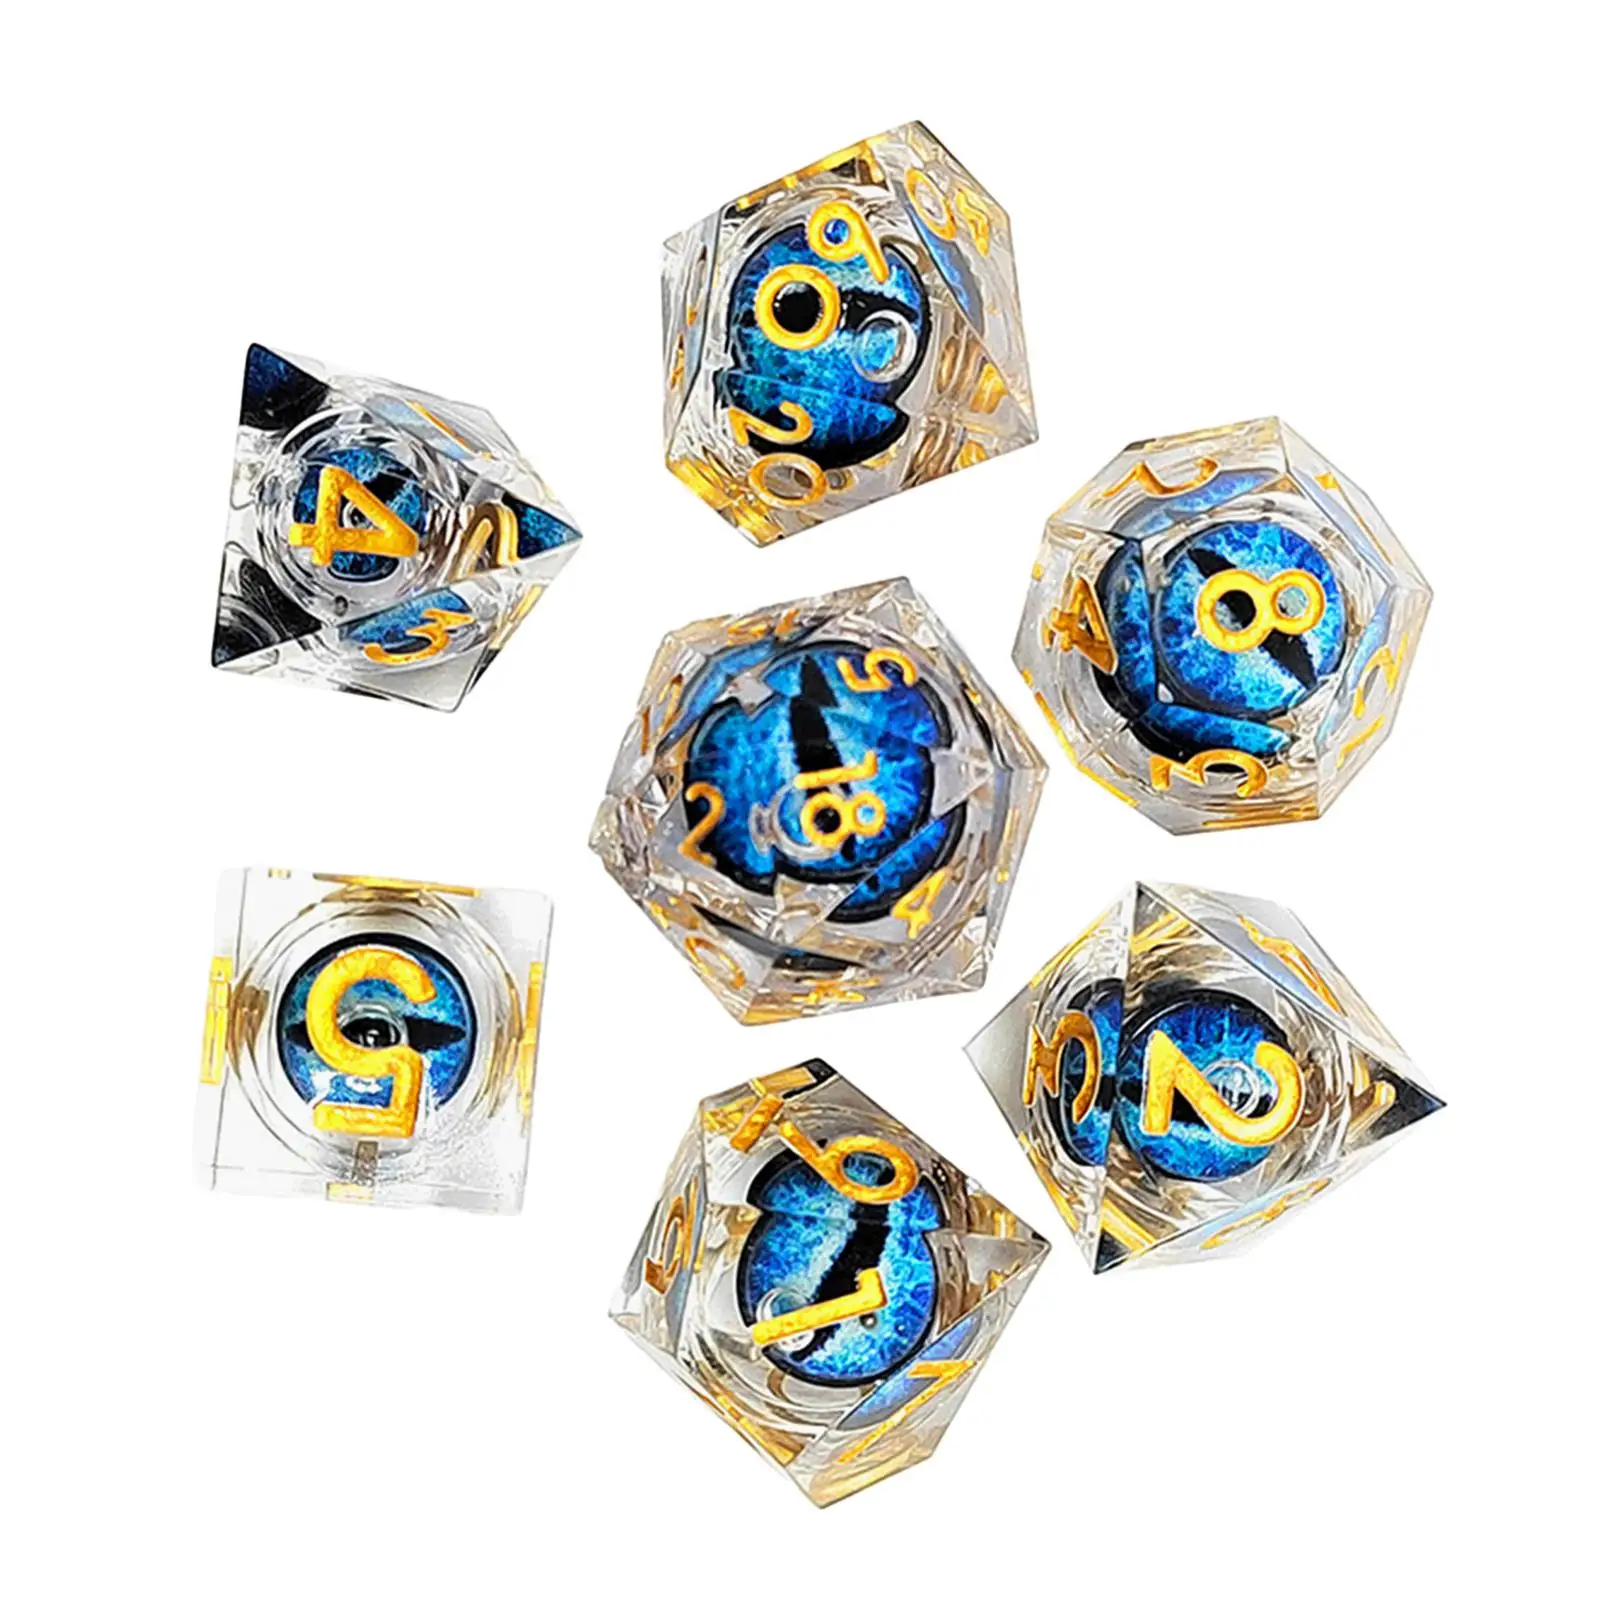 Resin Polyhedral Eye Dice 7Pcs Set Portable Exquisite Workmanship Reusable Versatile Accessories for Dice Collecting